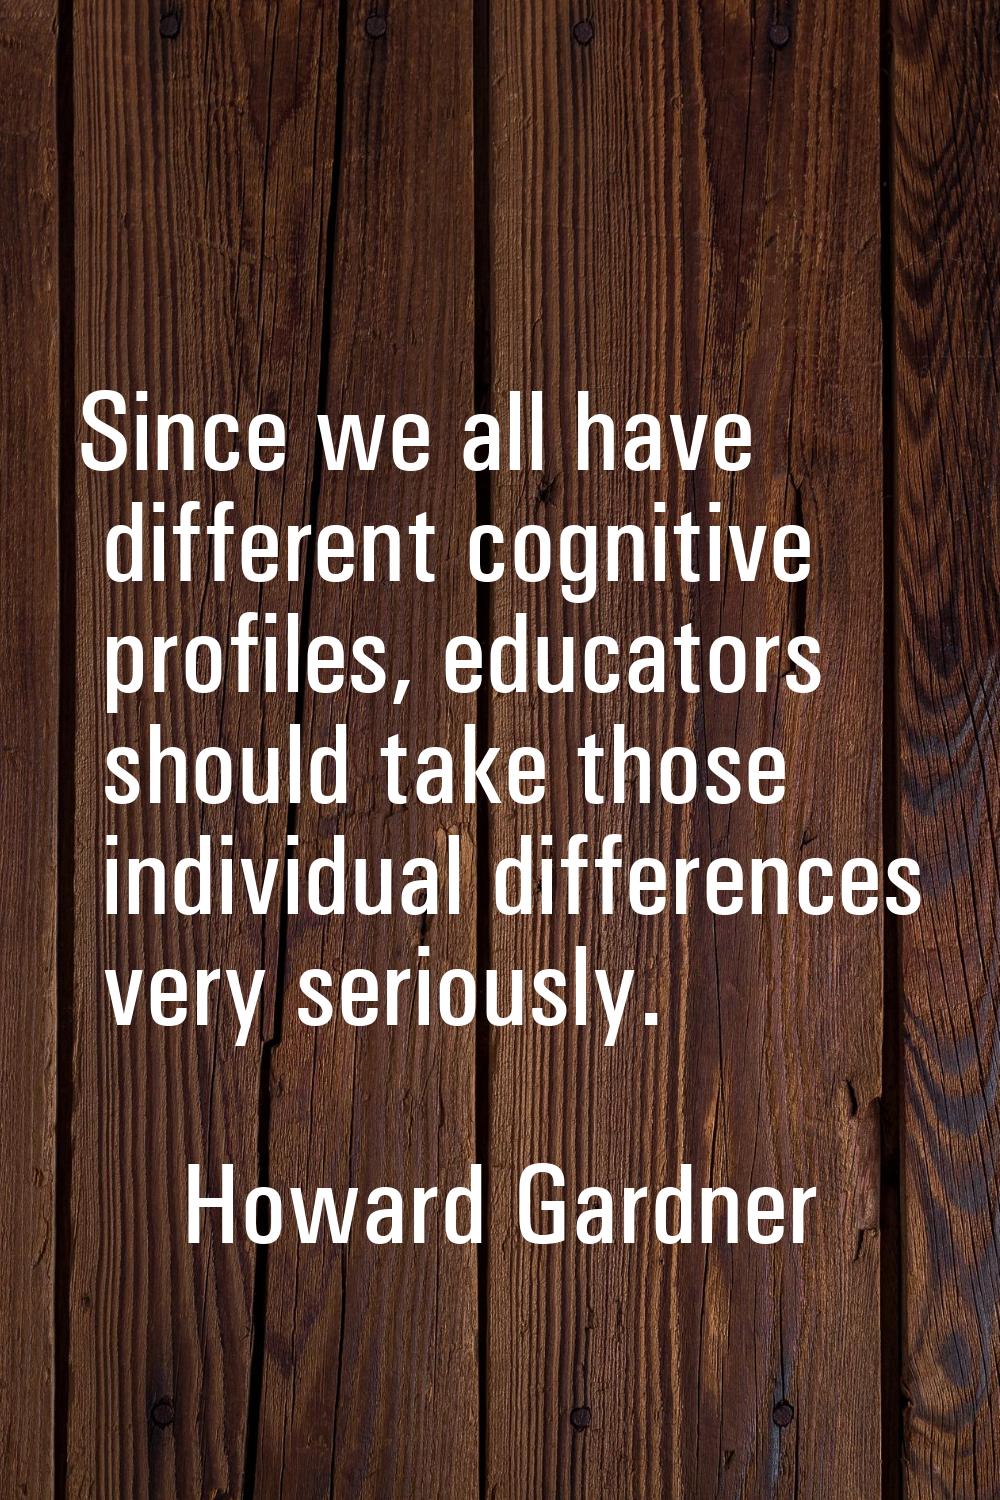 Since we all have different cognitive profiles, educators should take those individual differences 